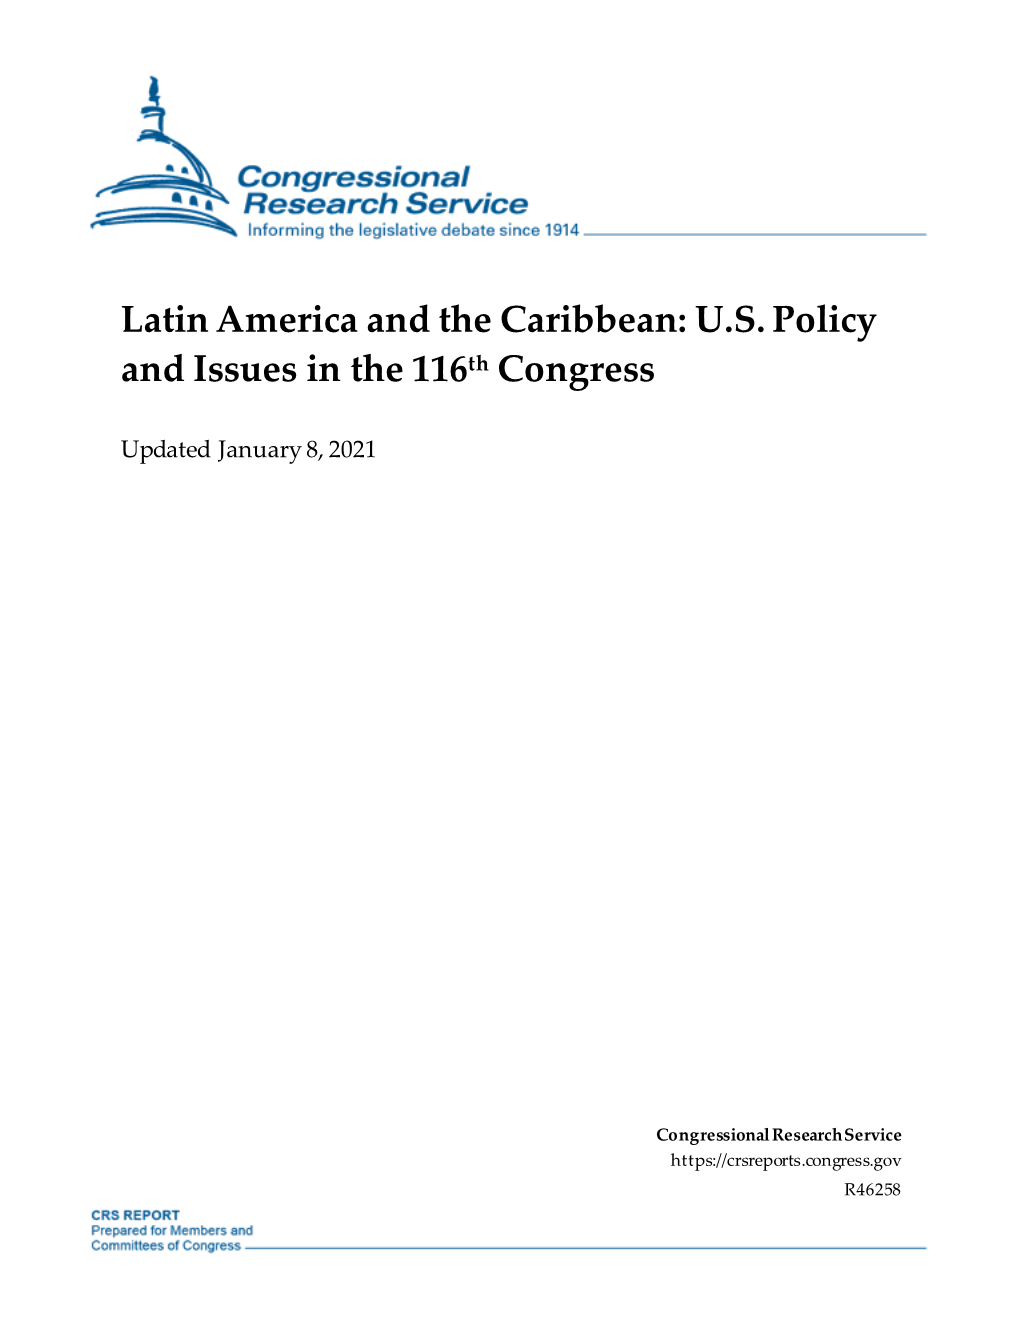 Latin America and the Caribbean: U.S. Policy and Issues in the 116Th Congress